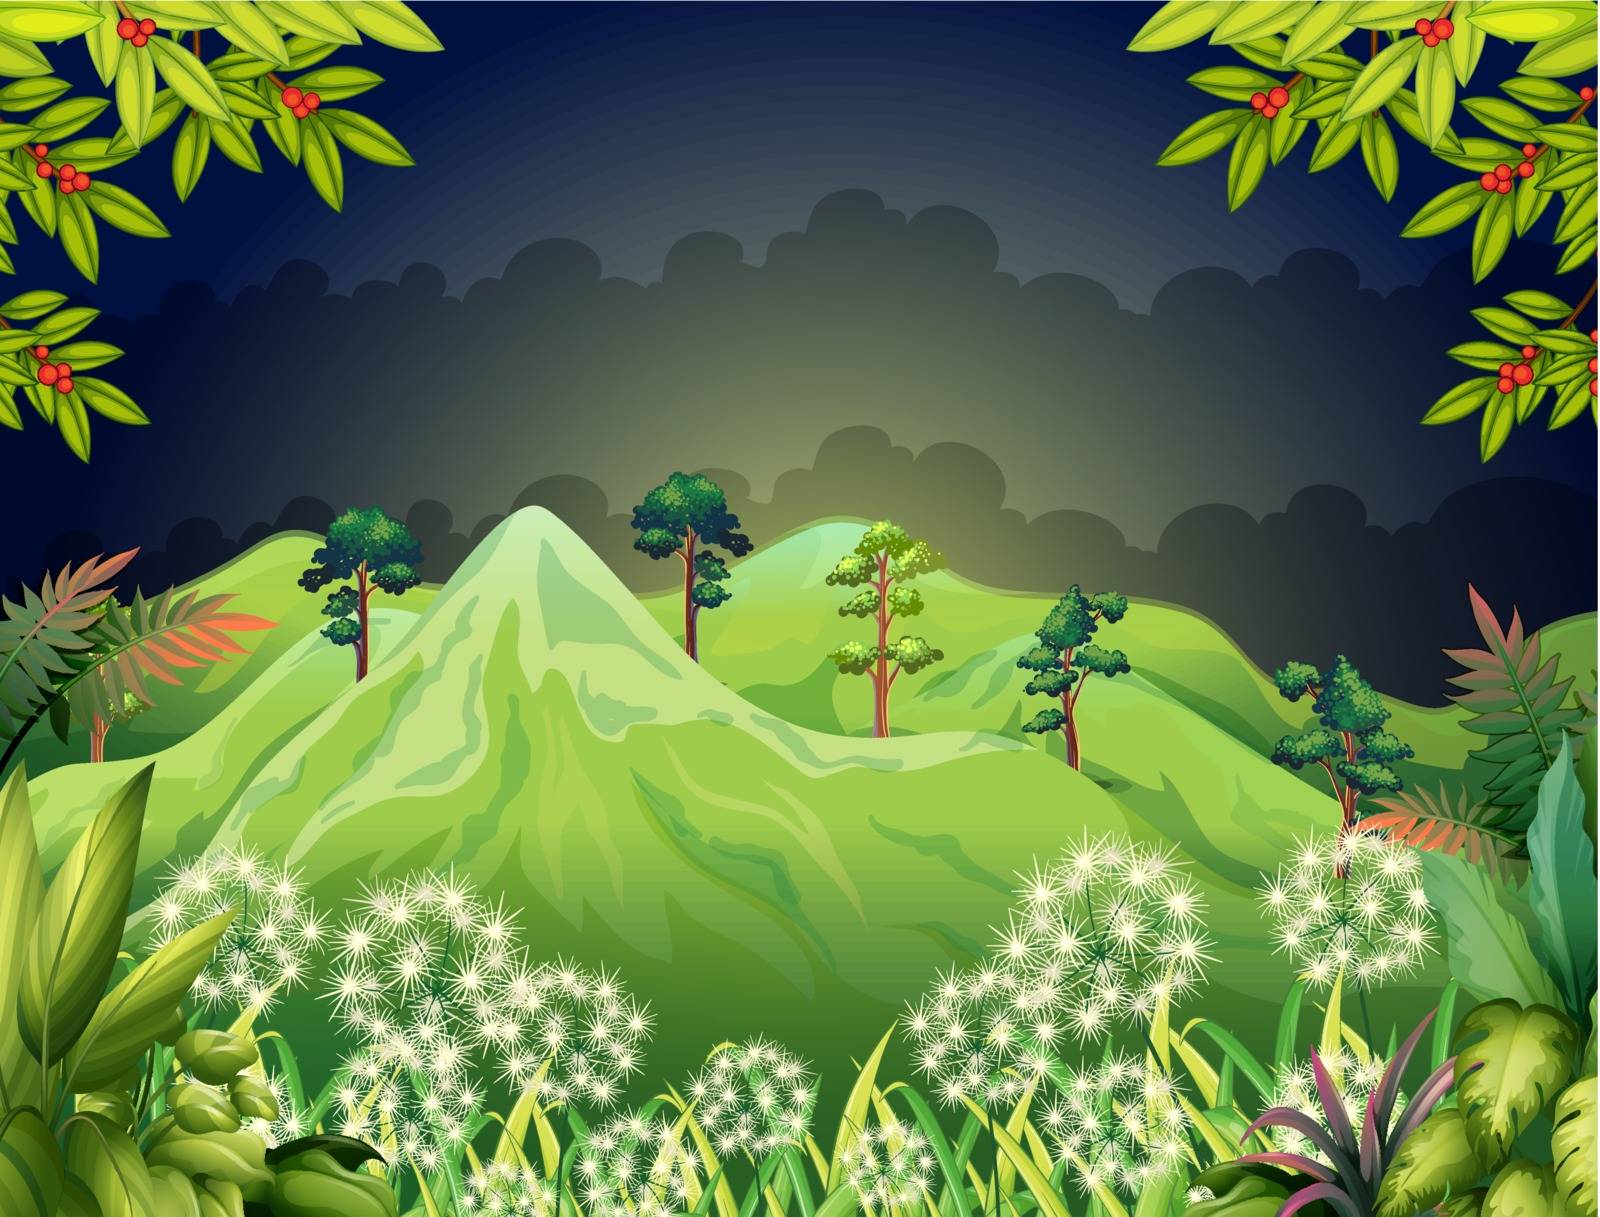 Illustration of the high mountains at the dark forest